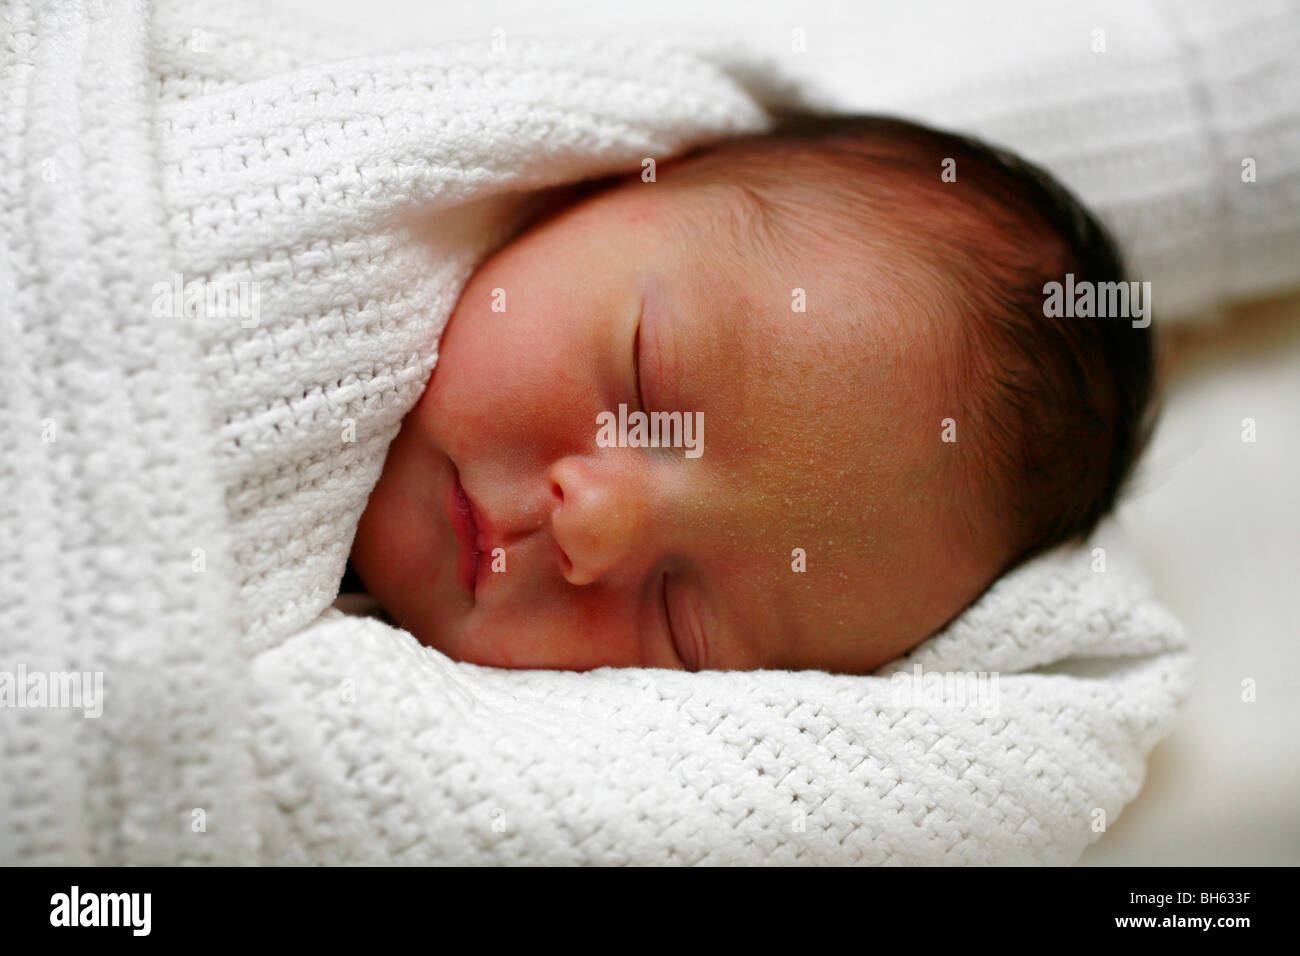 New born baby boy sleeping shortly after birth, swaddled in white blanket in hospital. Stock Photo